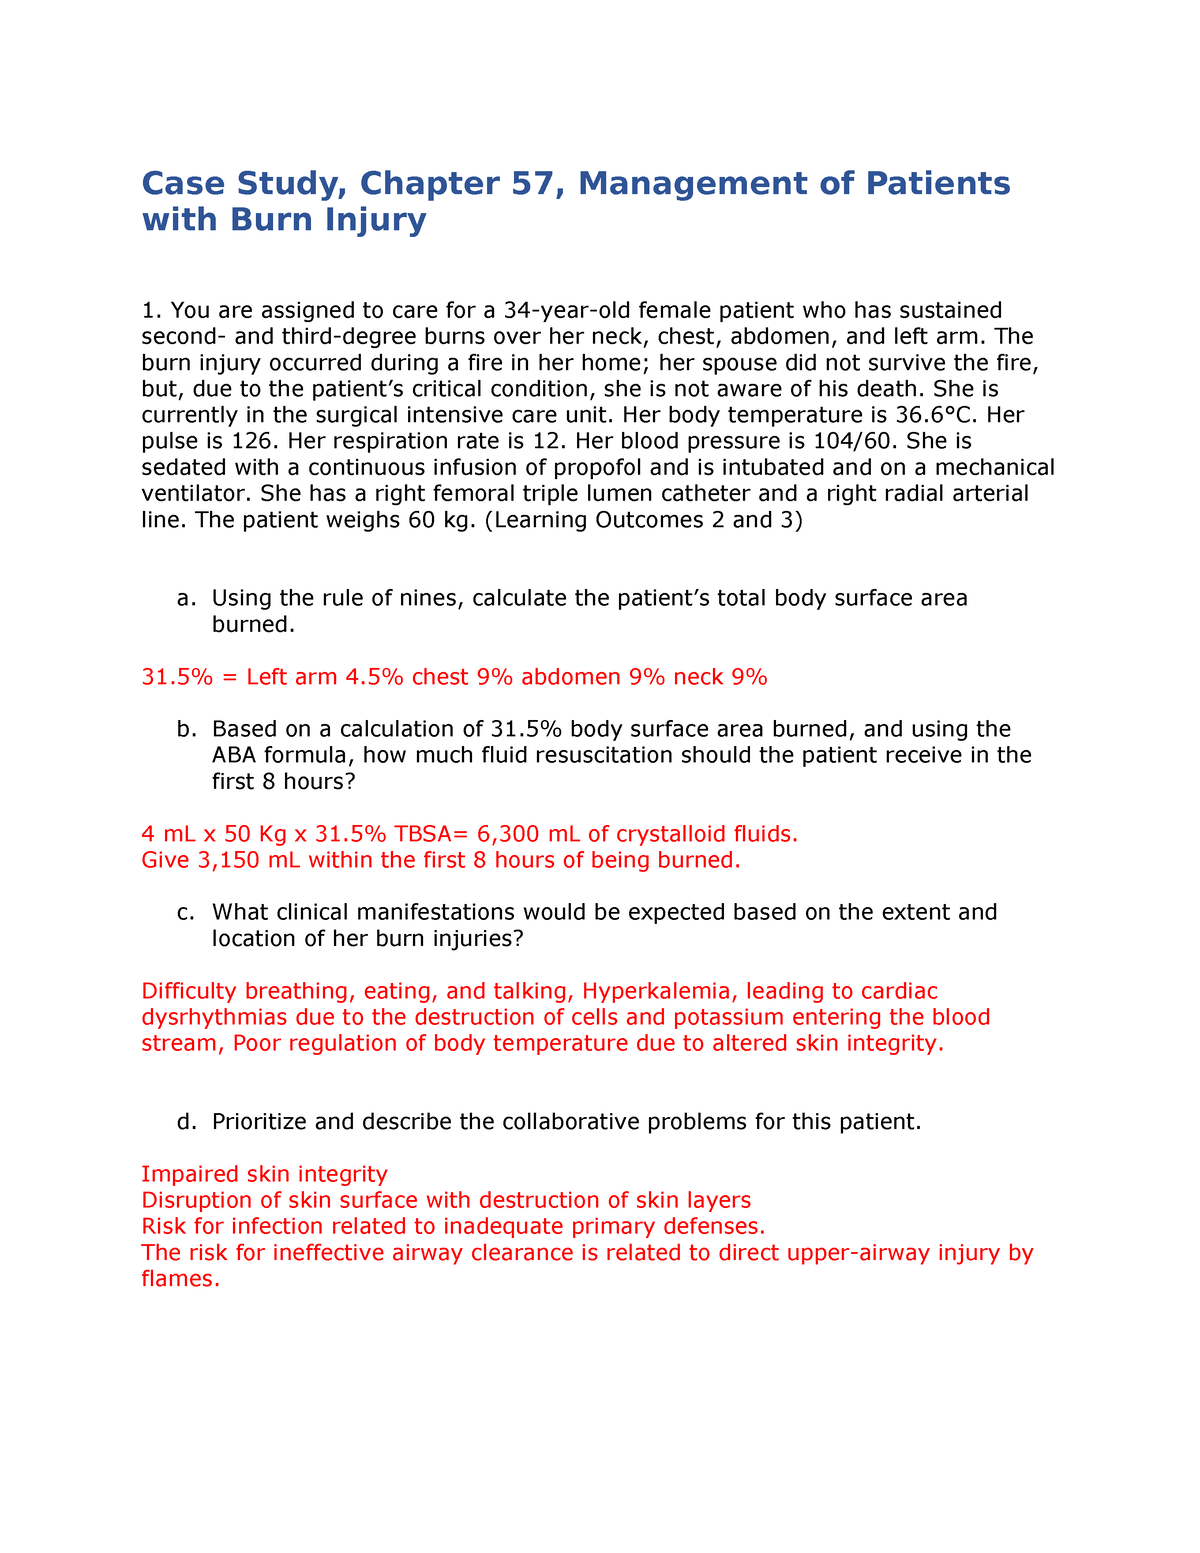 case study chapter 57 management of patients with burn injury